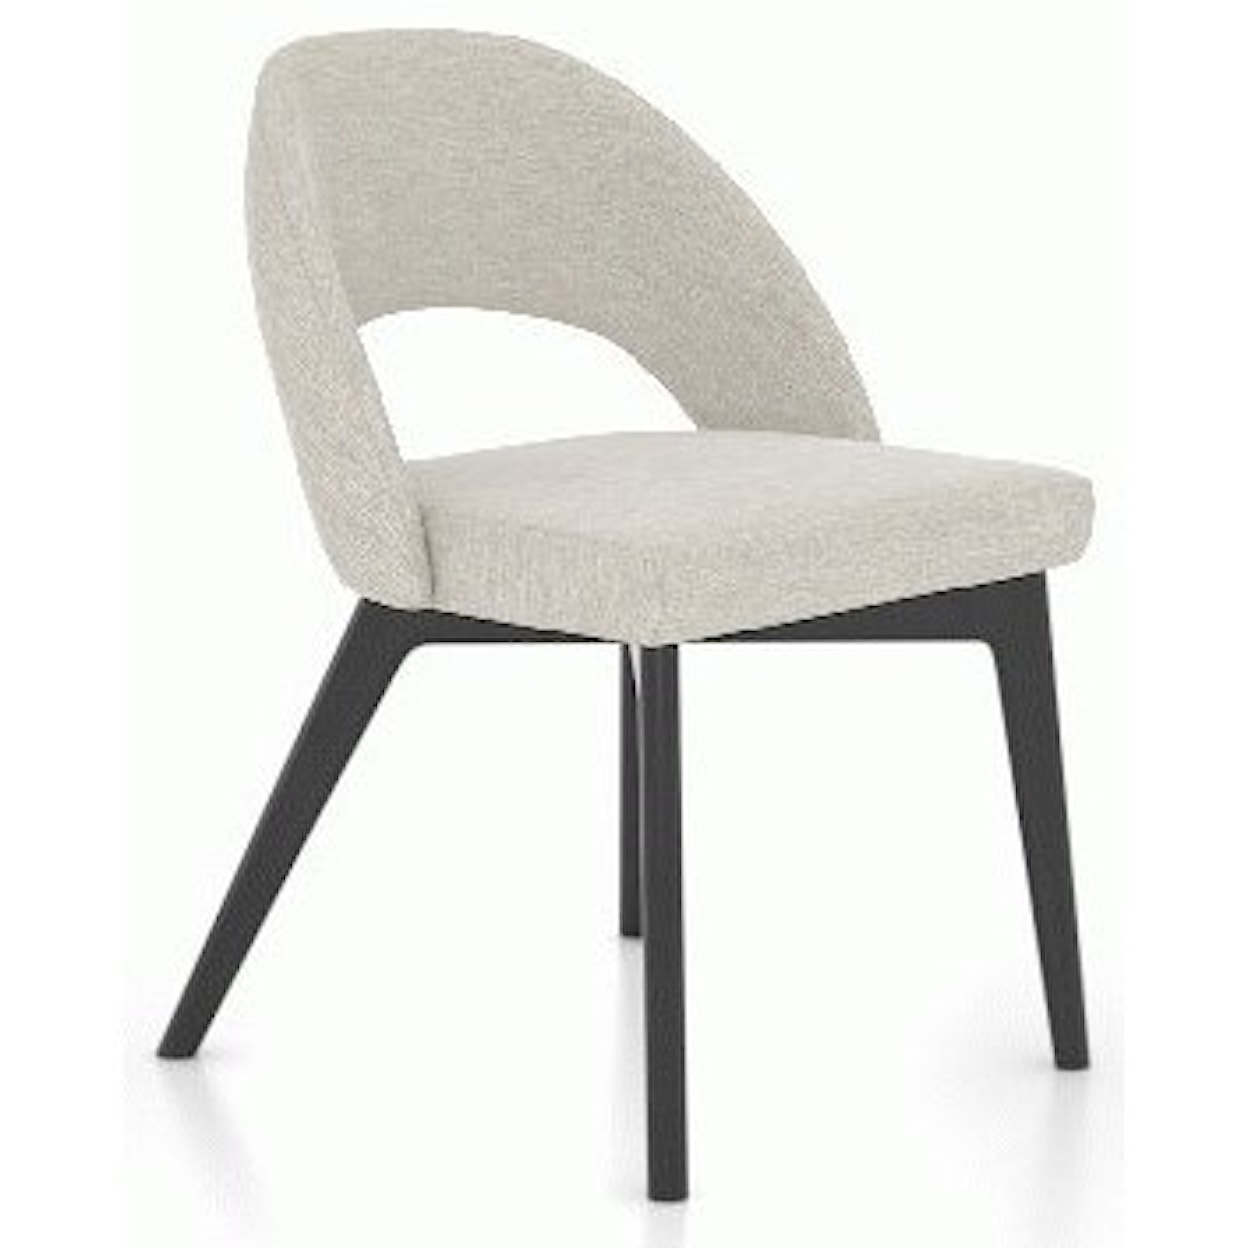 Canadel Downtown Upholstered Fixed Side Chair